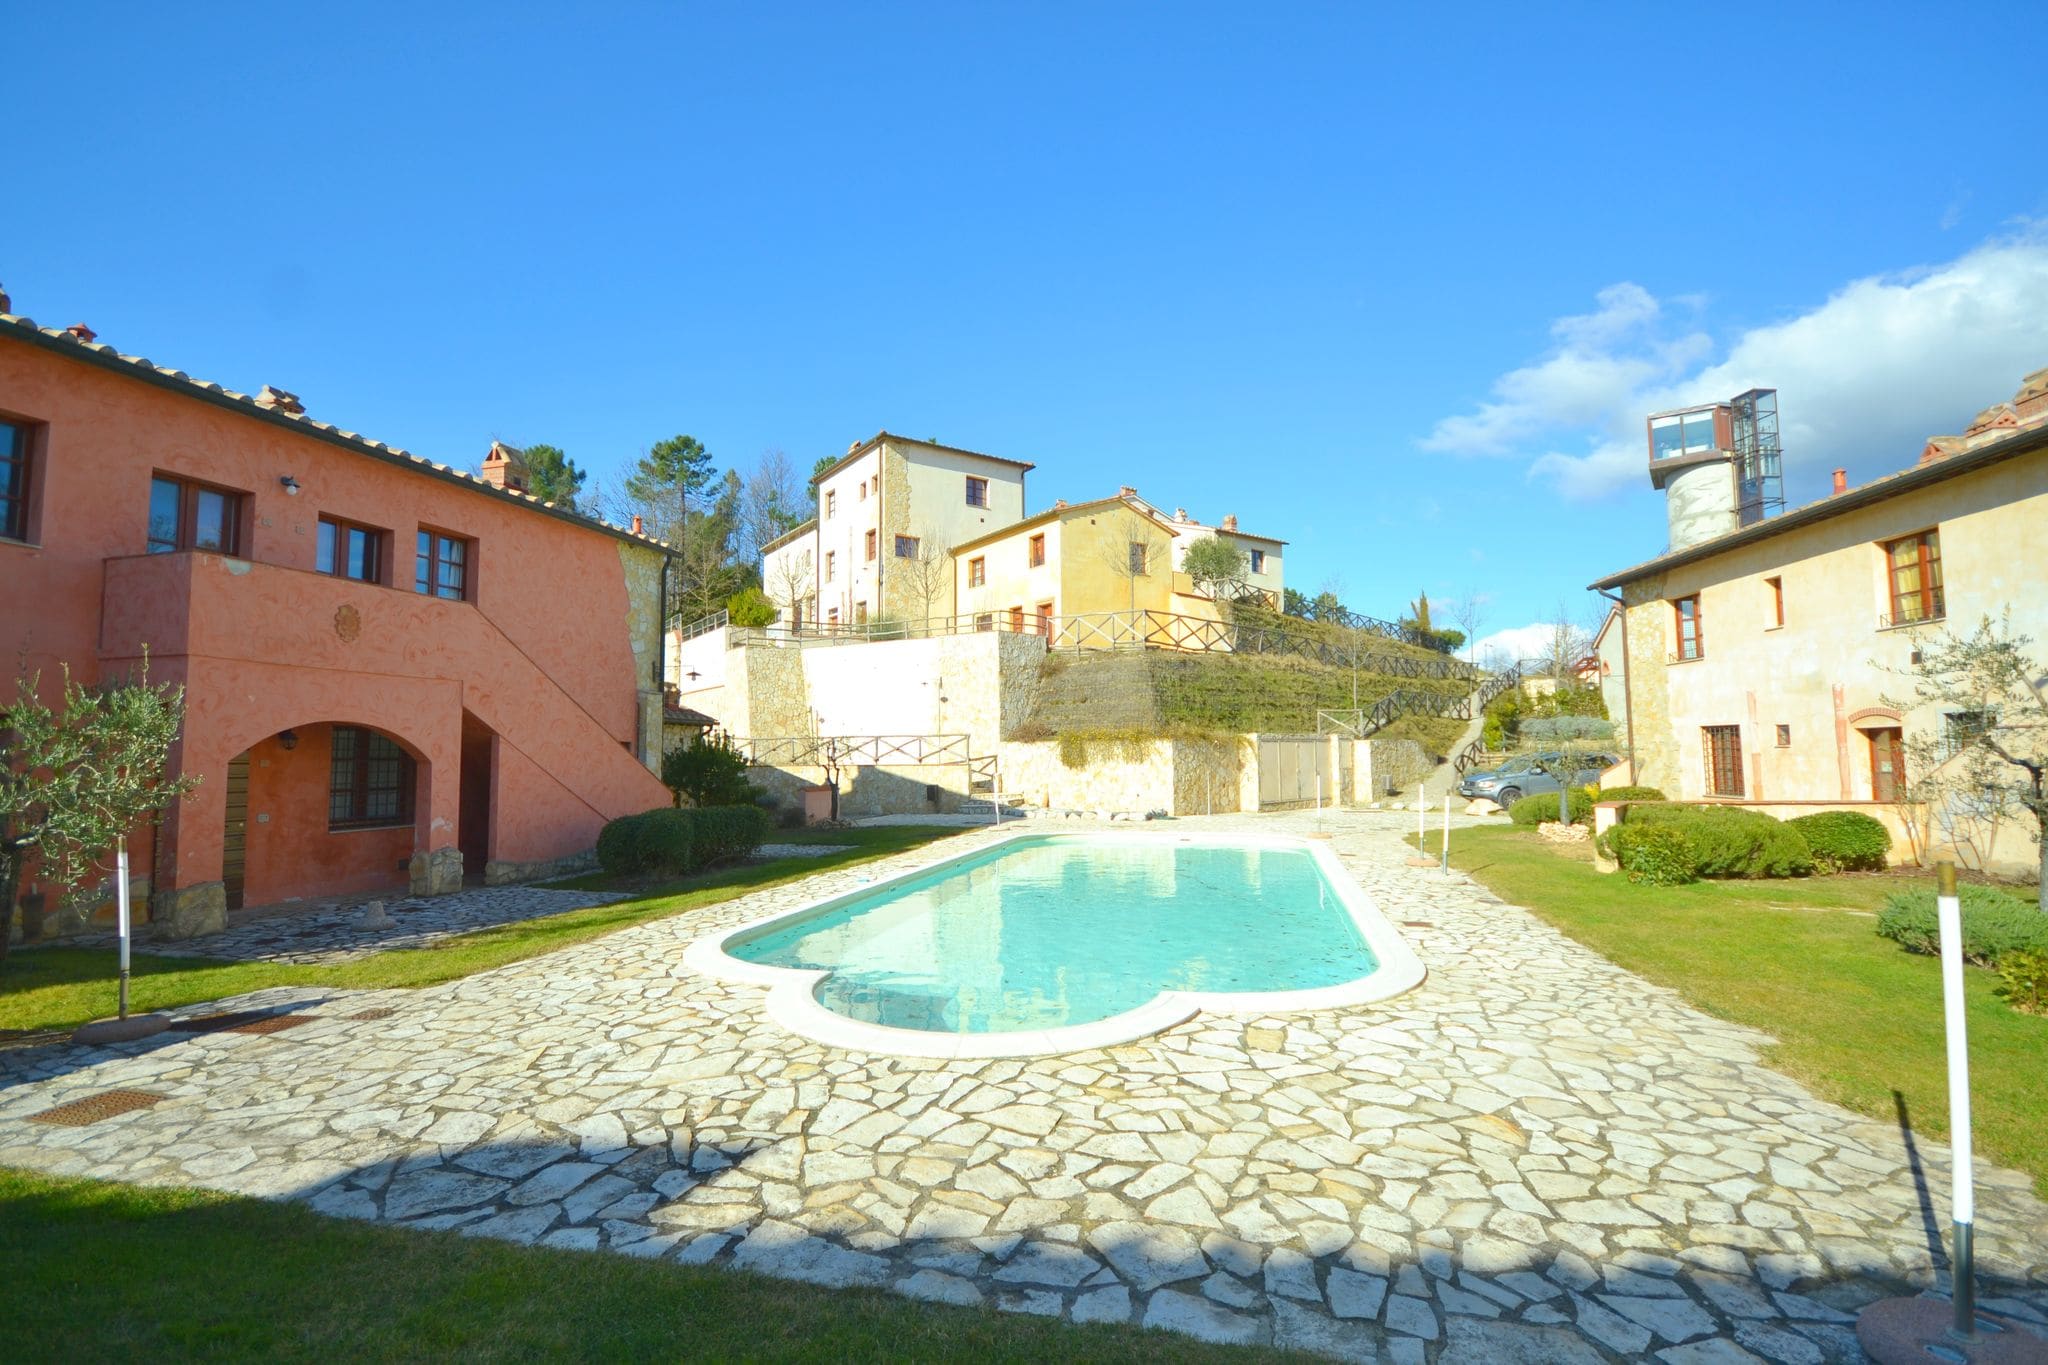 Cosy apartment with swimming pool and garden close to Volterra and S. Gimignano!